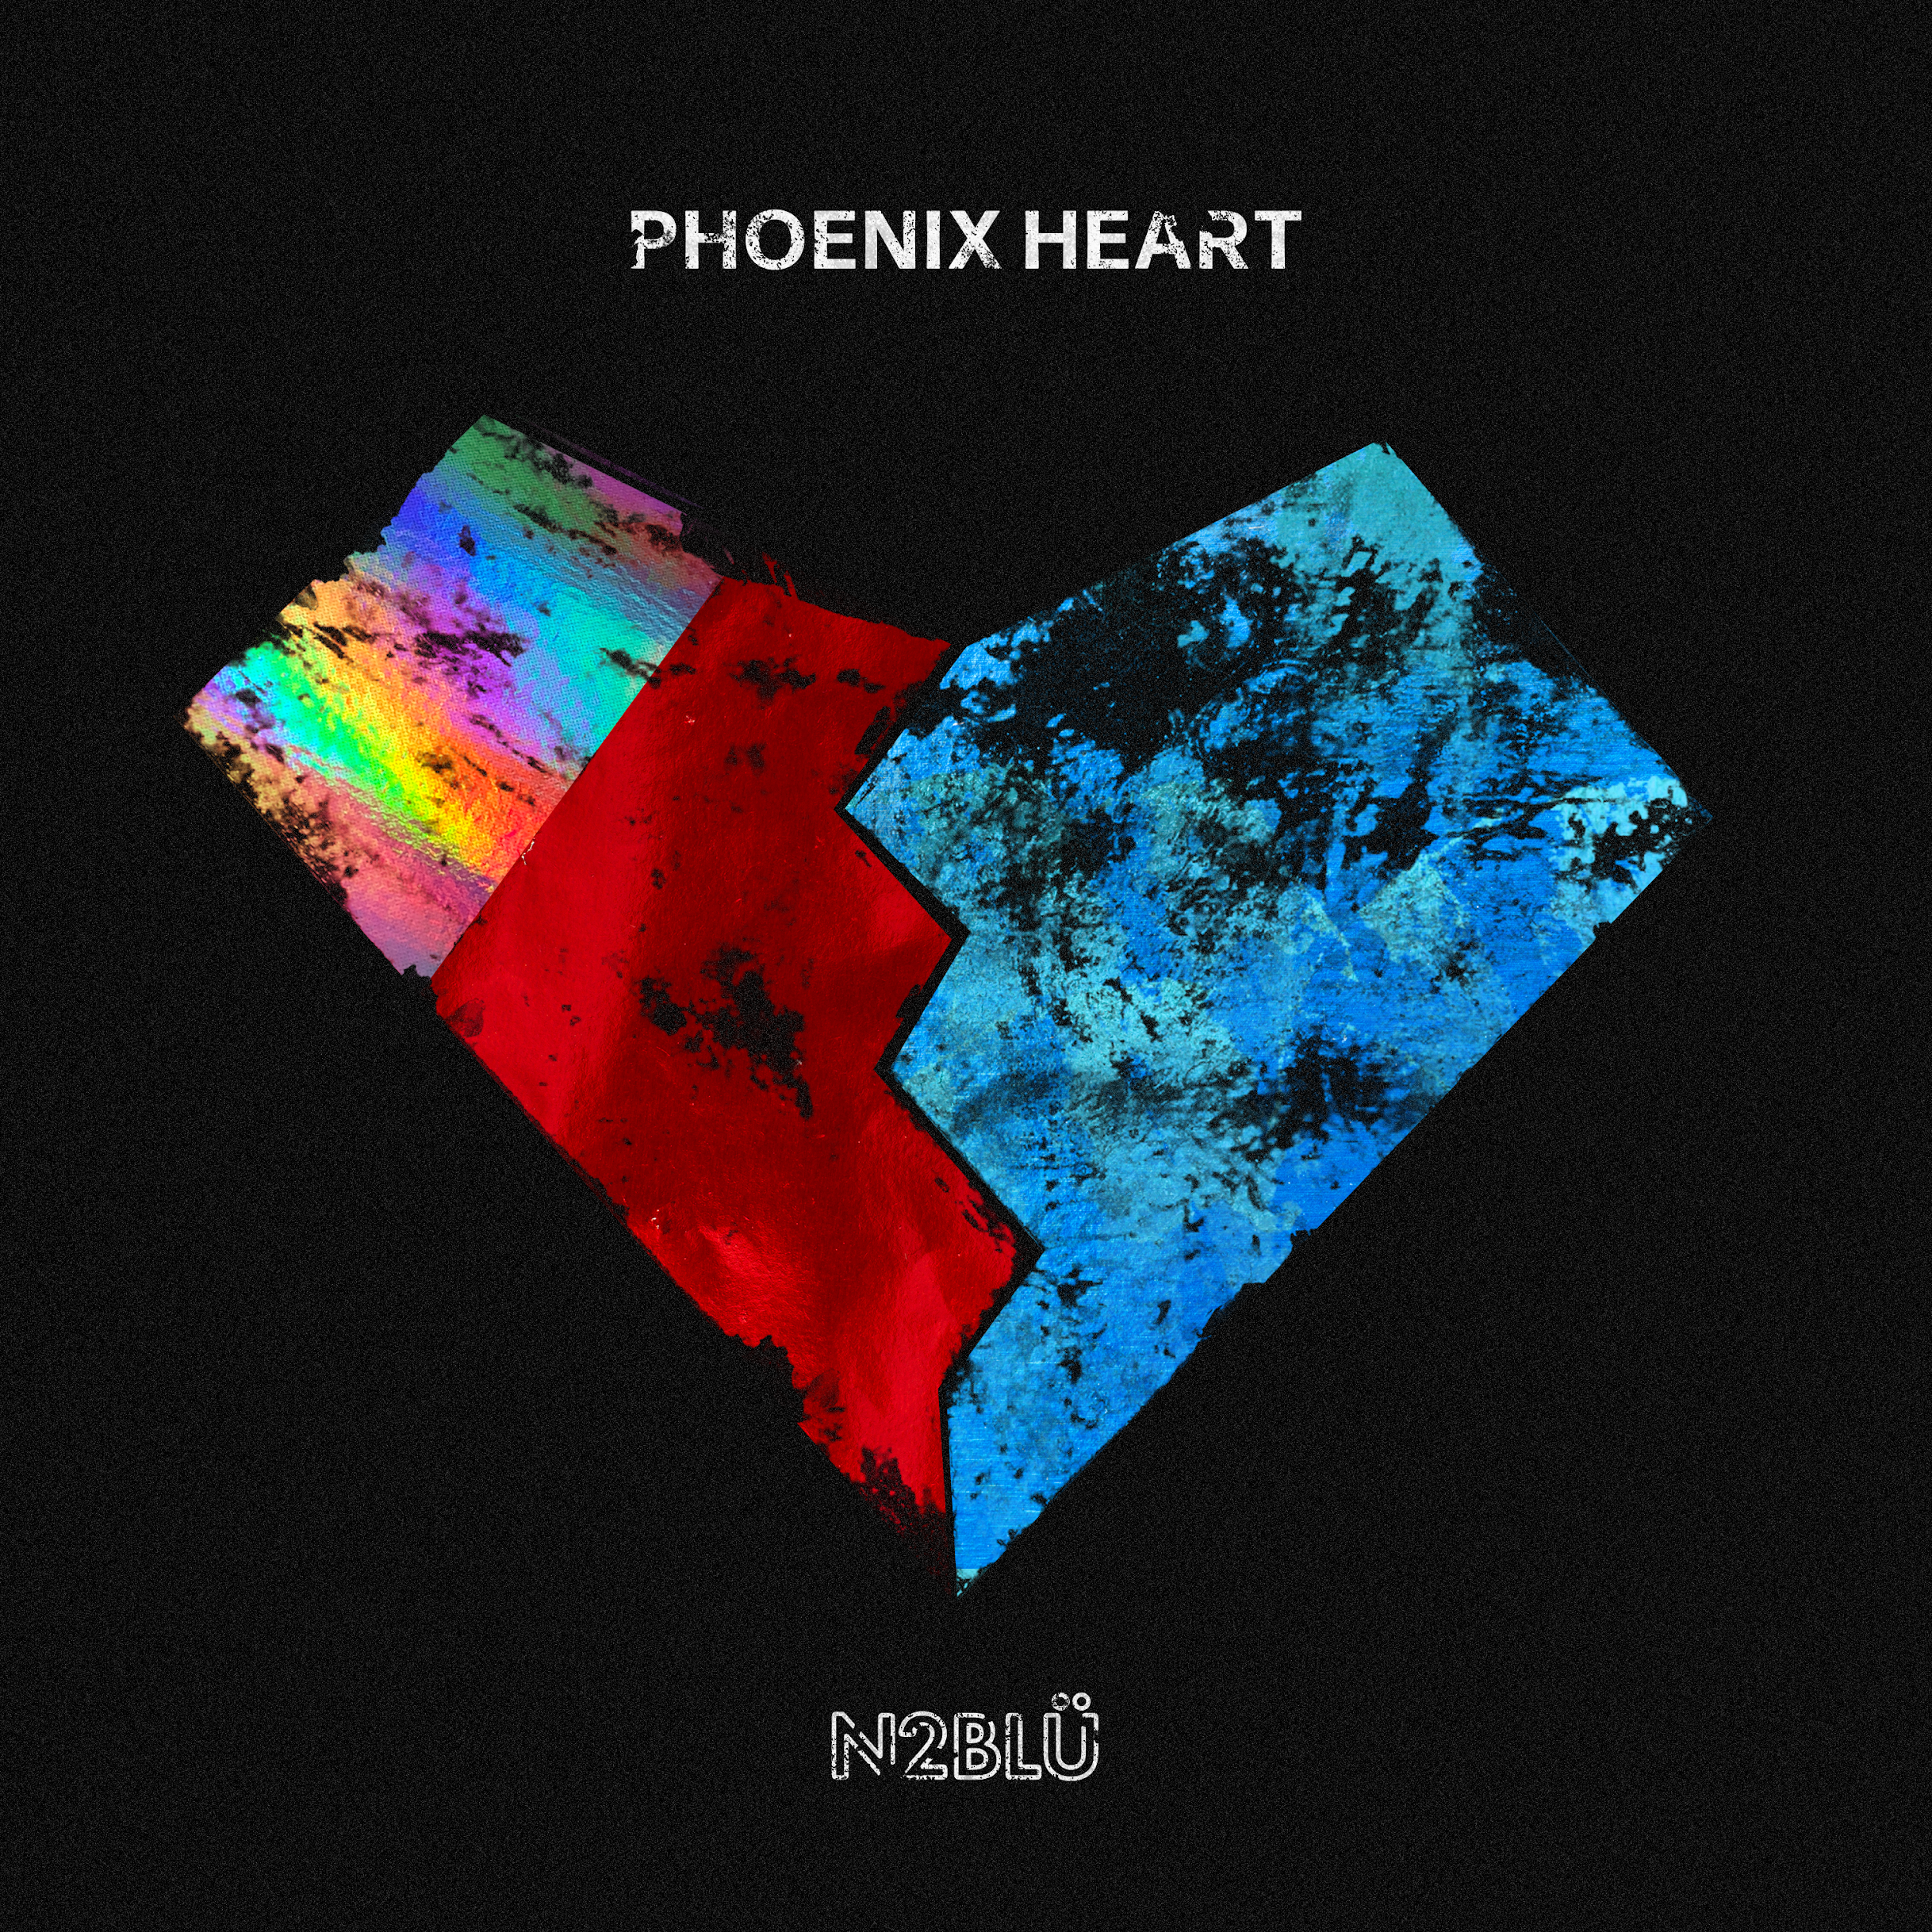 Grooving away from inner battles, N2BLÜ return with a strong ‘Phoenix Heart’